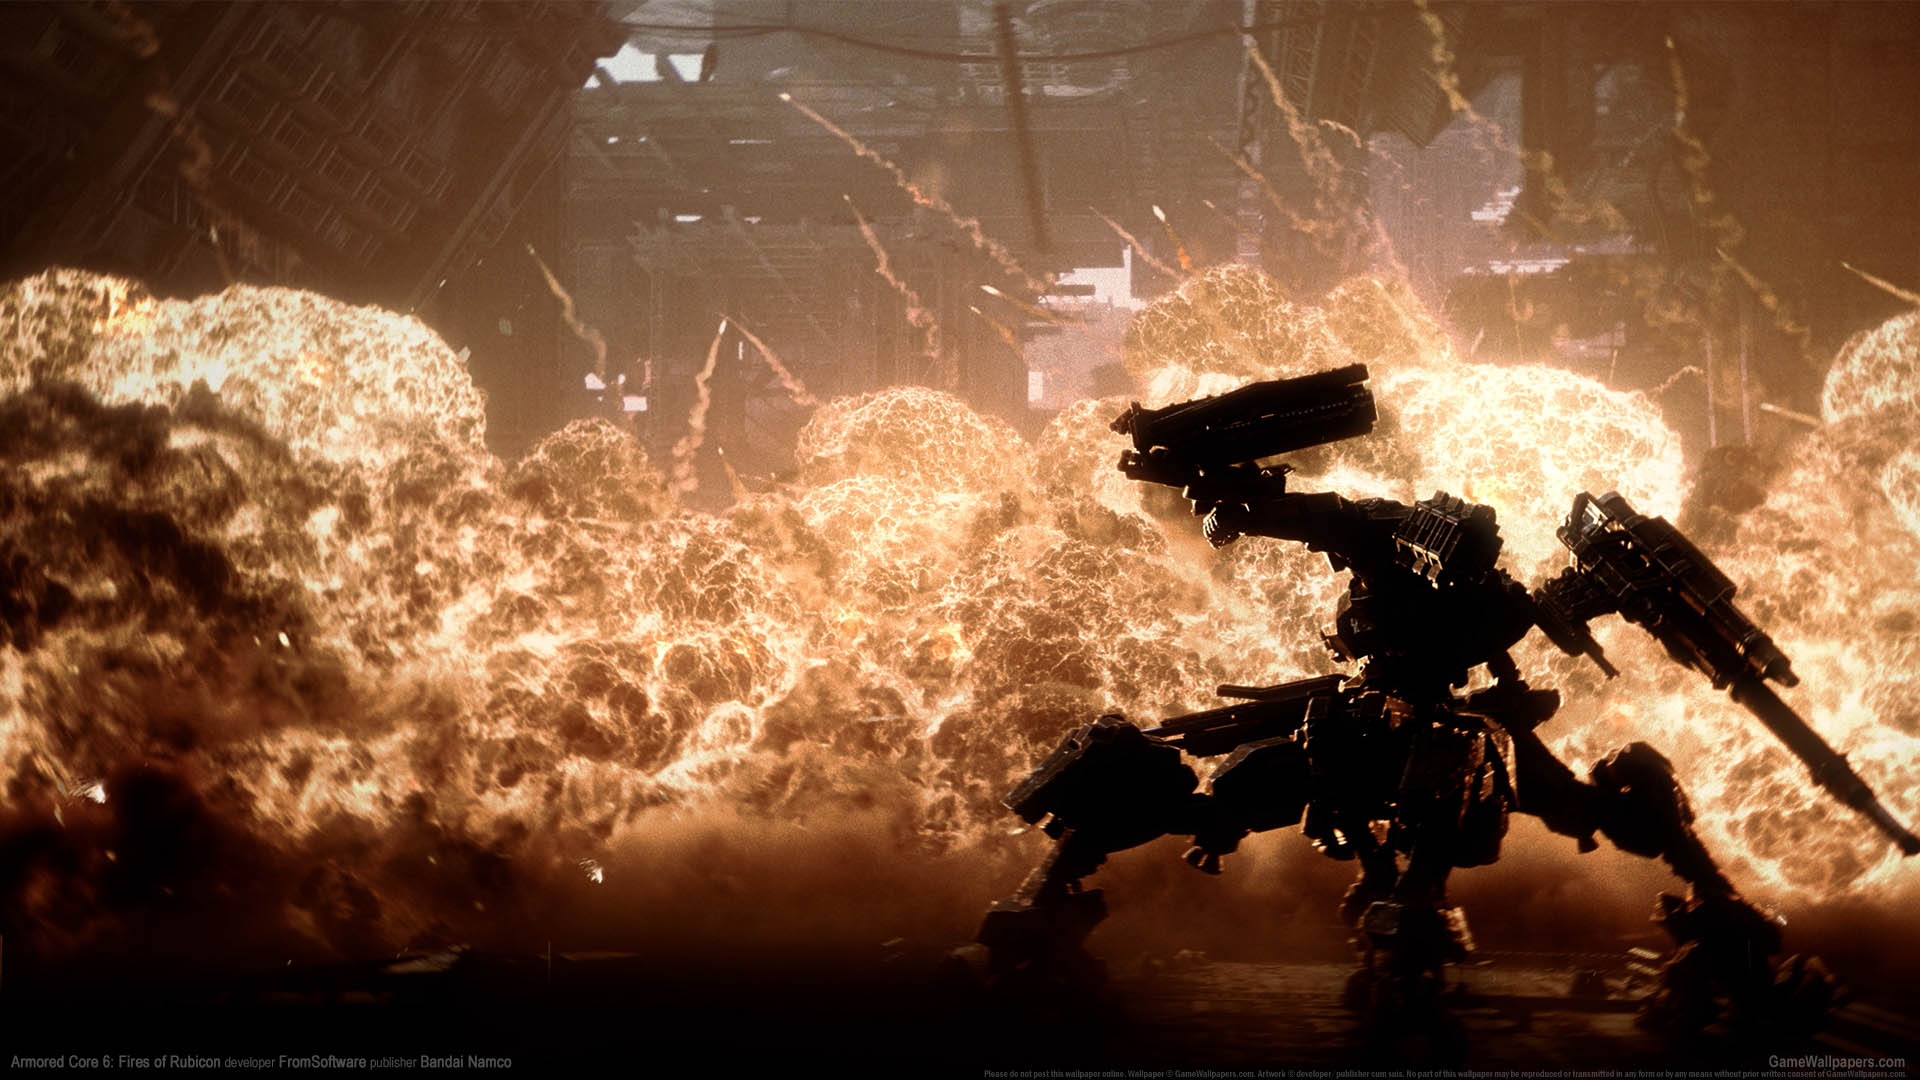 Armored Core 6: Fires of Rubicon wallpaper 01 1920x1080